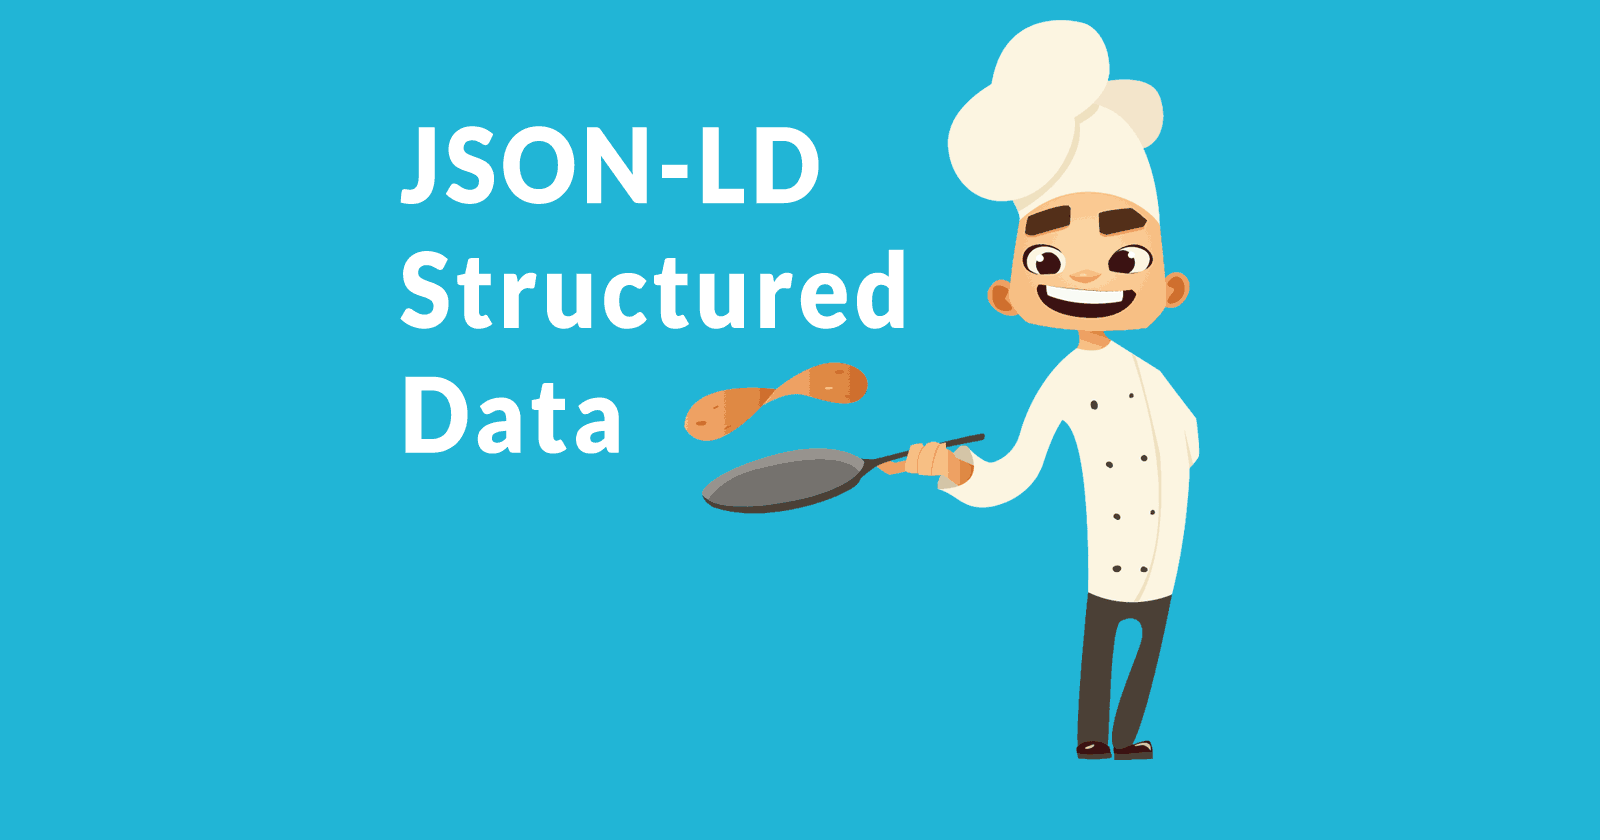 Image of a chef, a metaphor for JSON-LD having all the right ingredients for top rankings. Image contains the words, JSON-LD Structured Data